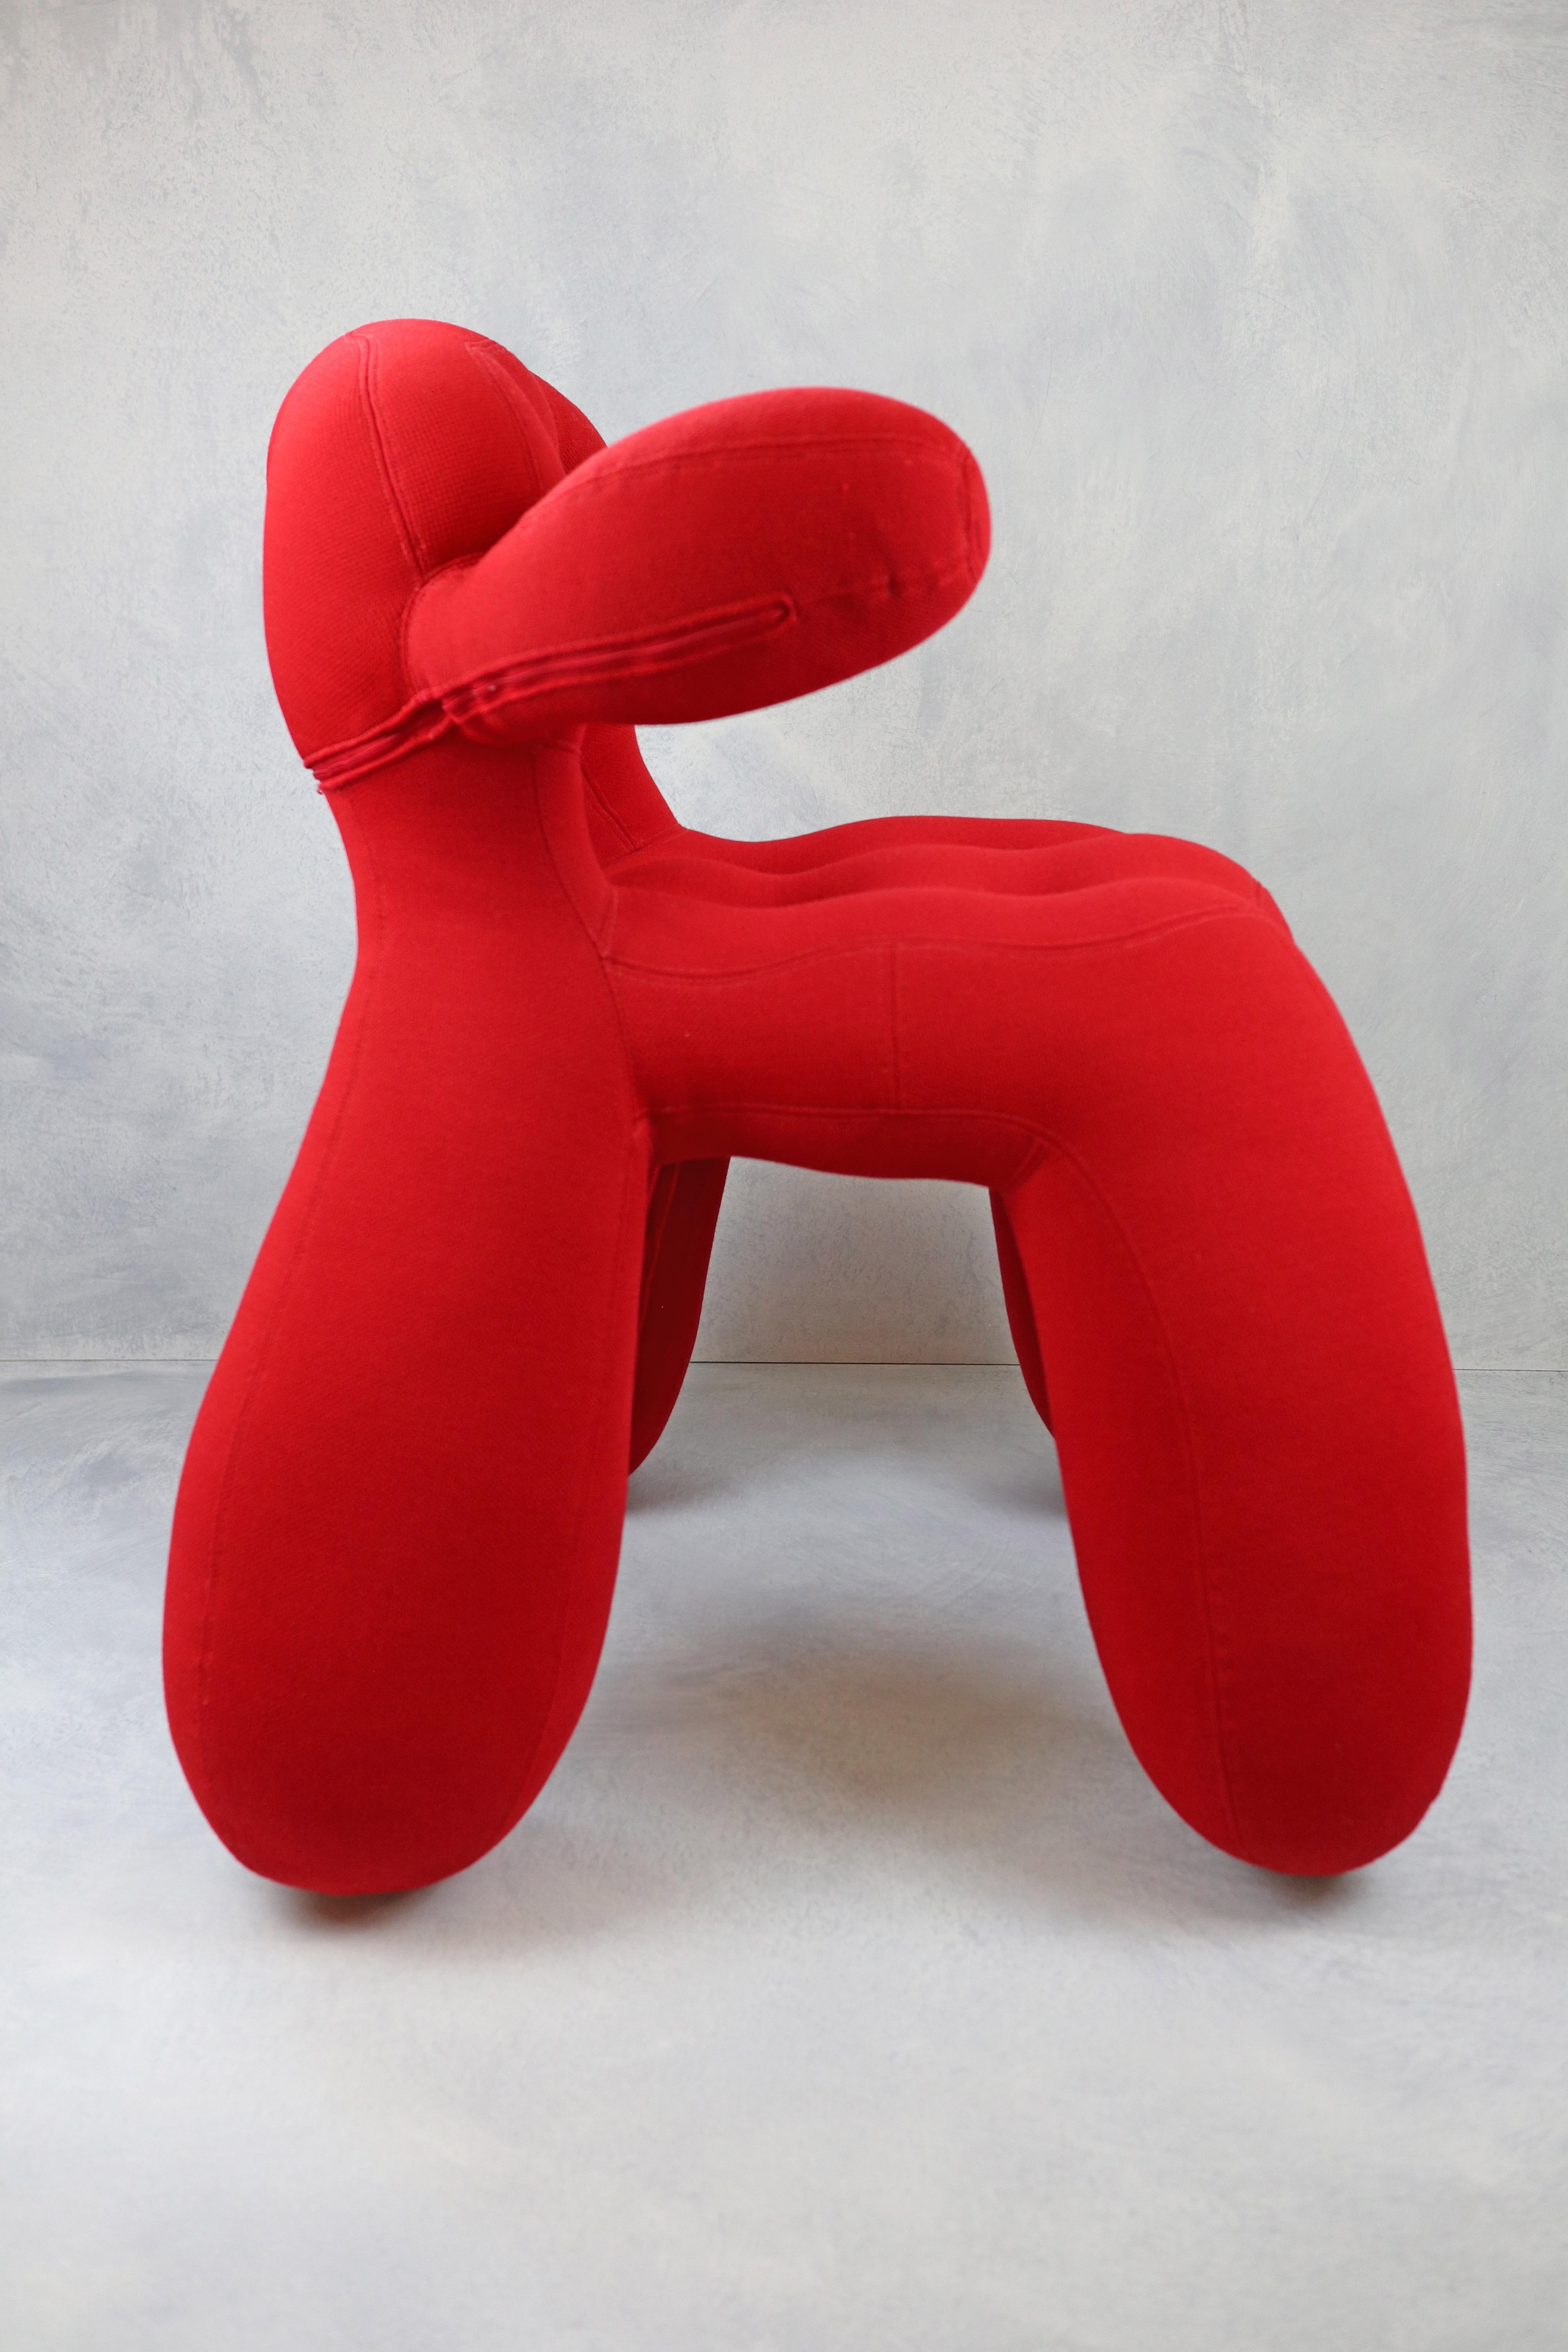 Soft Upholstered and Textile Covered 'Fat' Chair in Electric Red by Lambert Kamps is Presented by House On Mars

The ‘Fat chair’ is part of a satiricaly themed furniture collection, reflecting on the Western consumer society in the most comfortable,